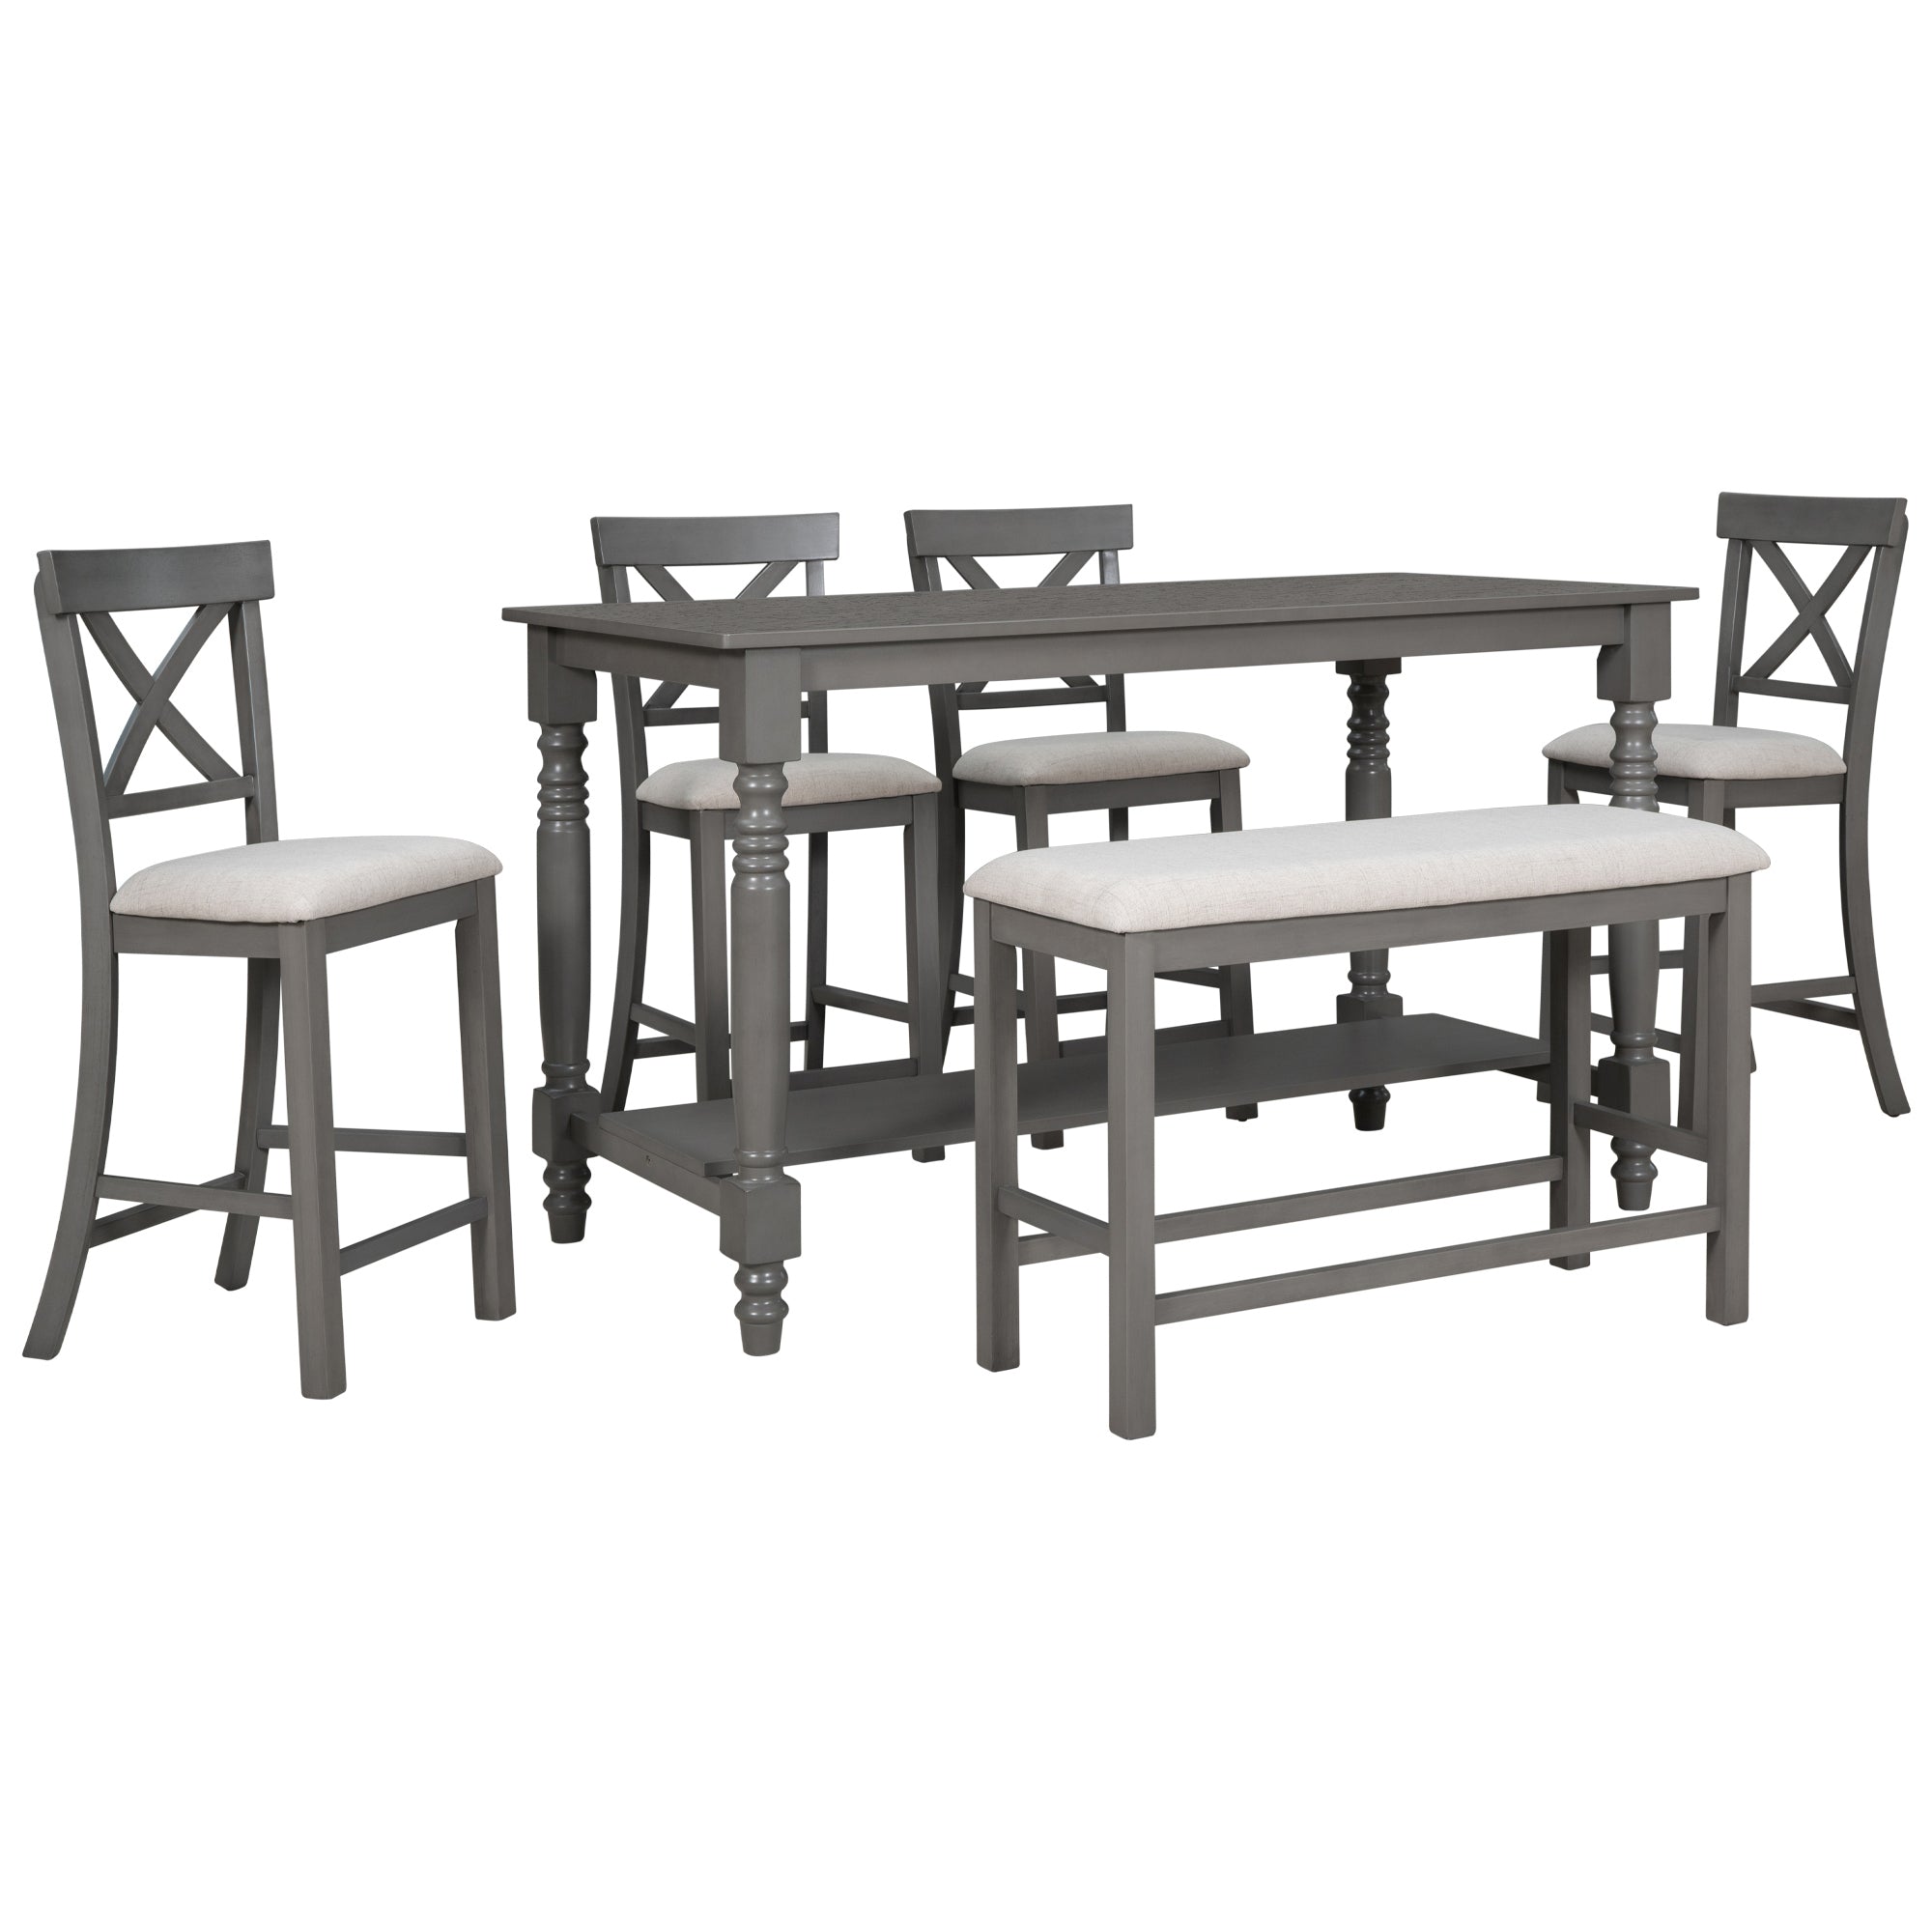 TREXM 6-Piece Counter Height Dining Table Set Table with Shelf 4 Chairs and Bench for Dining Room (Gray)